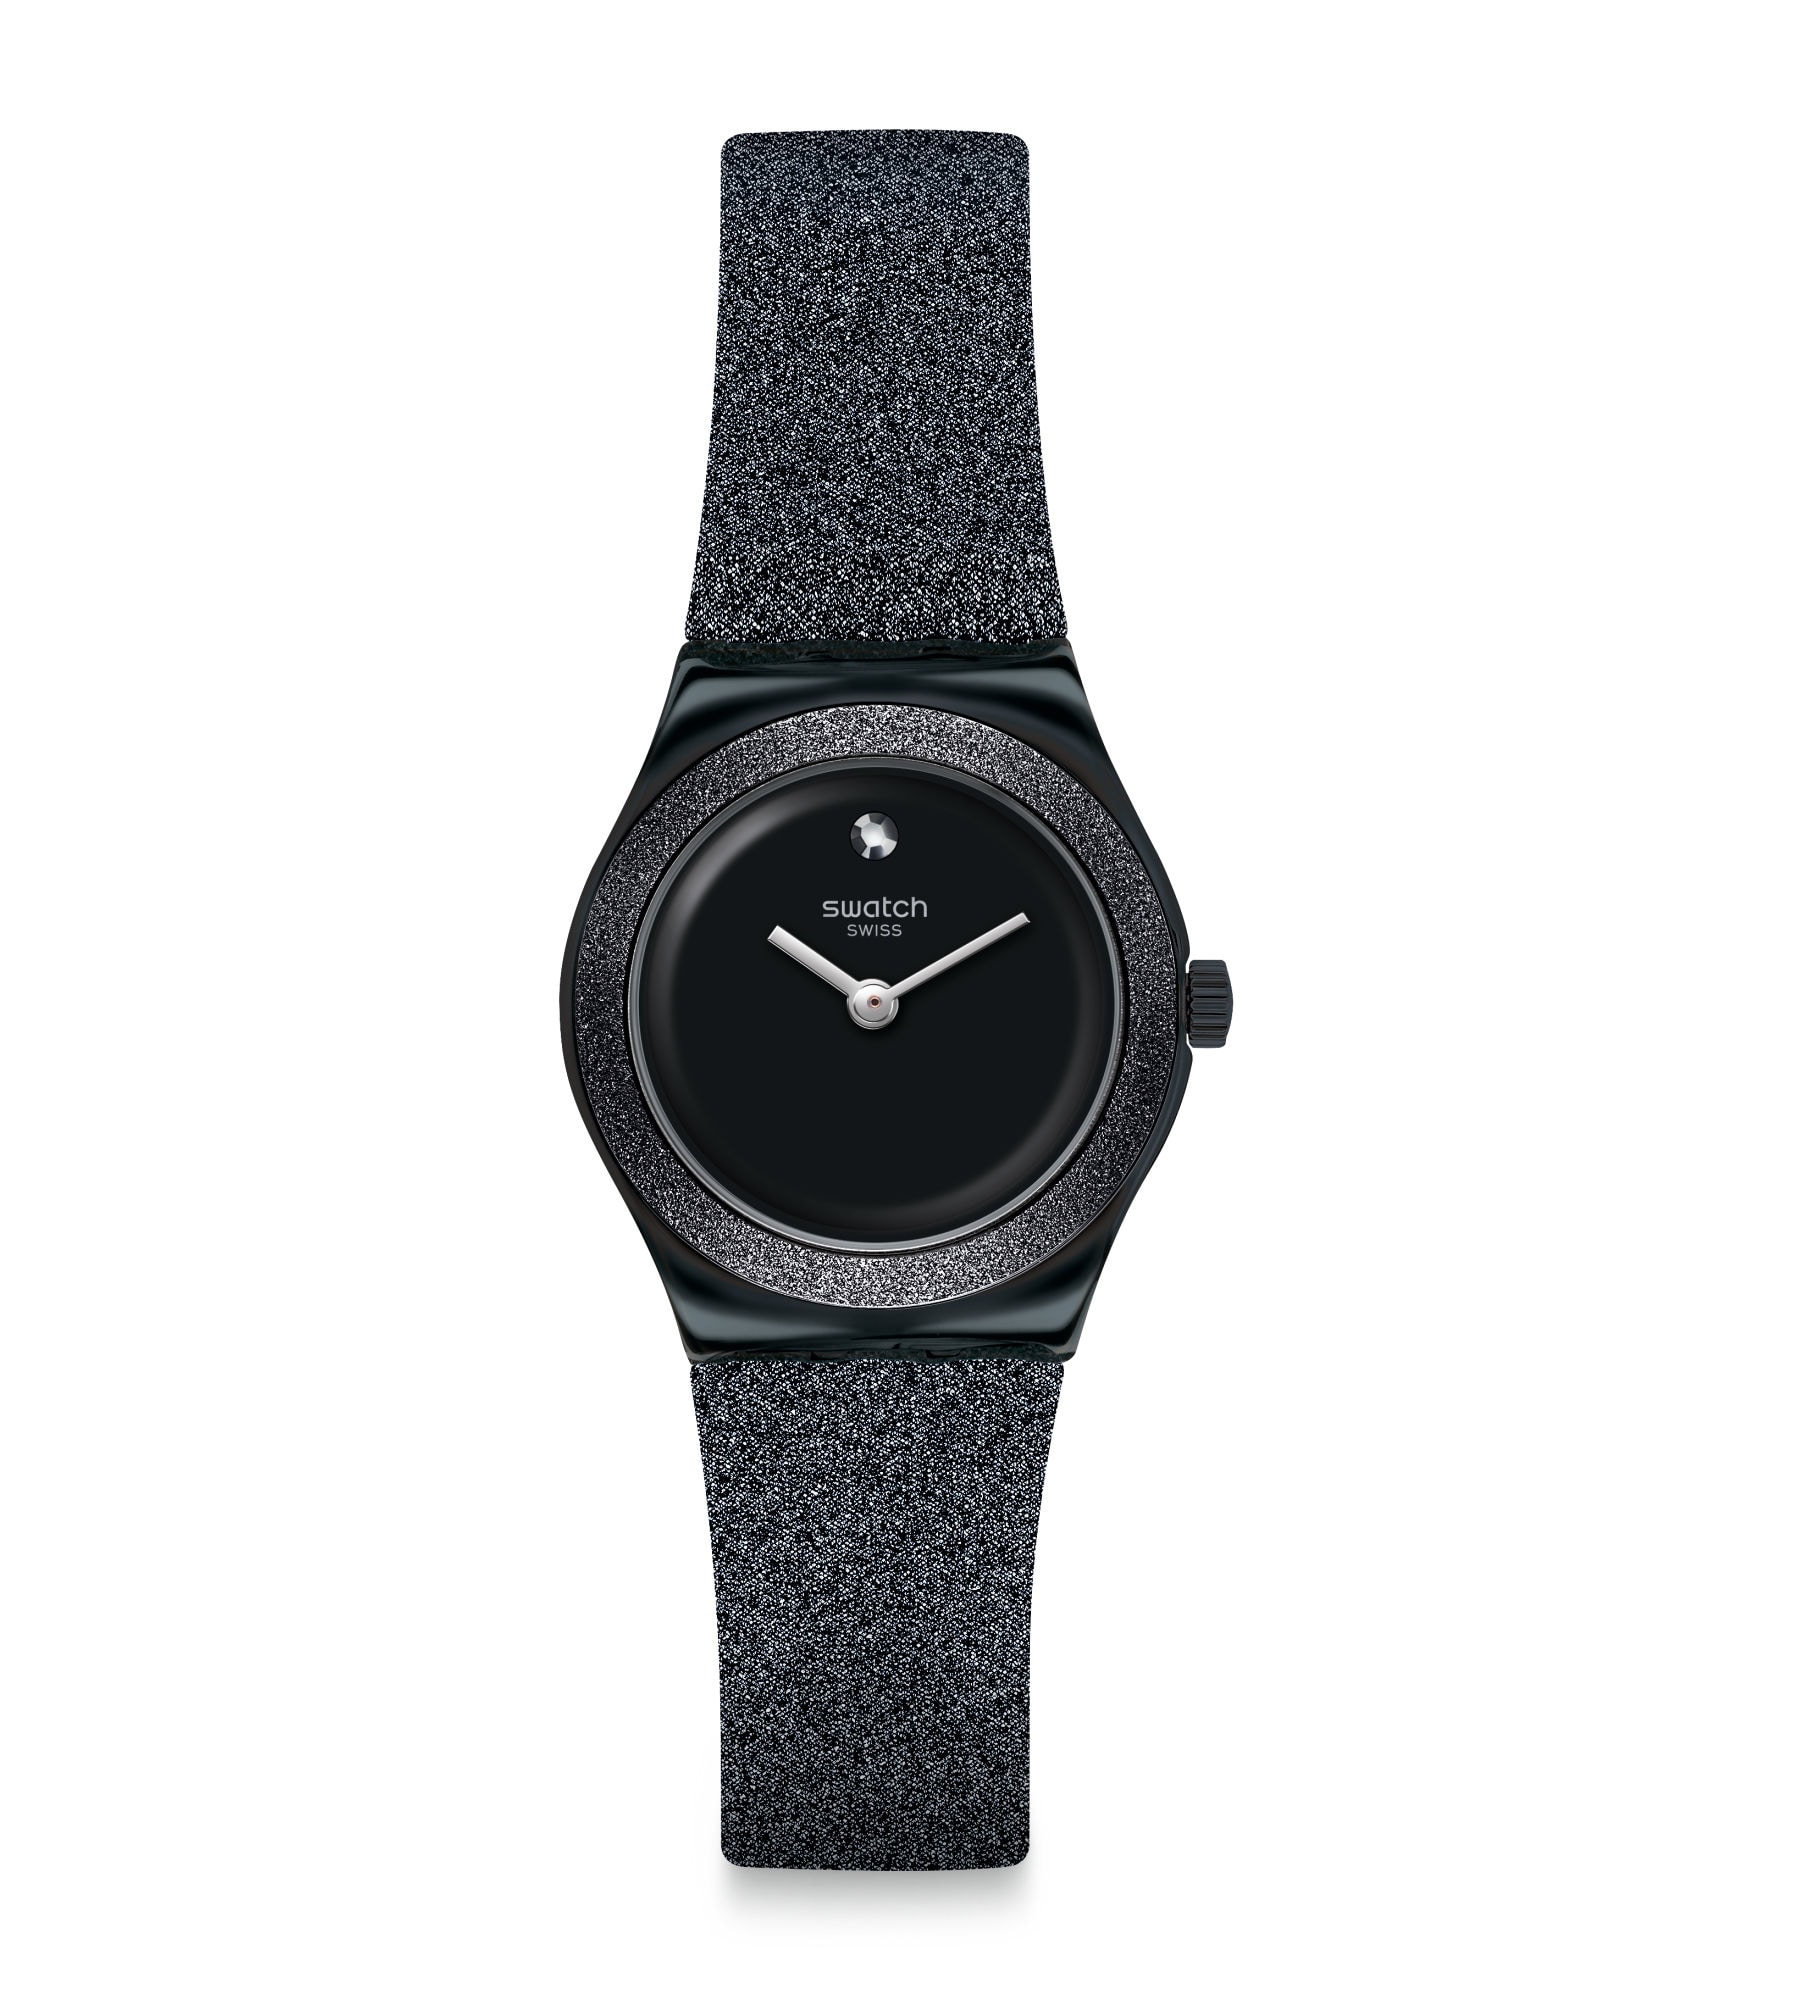 swatch moon watch